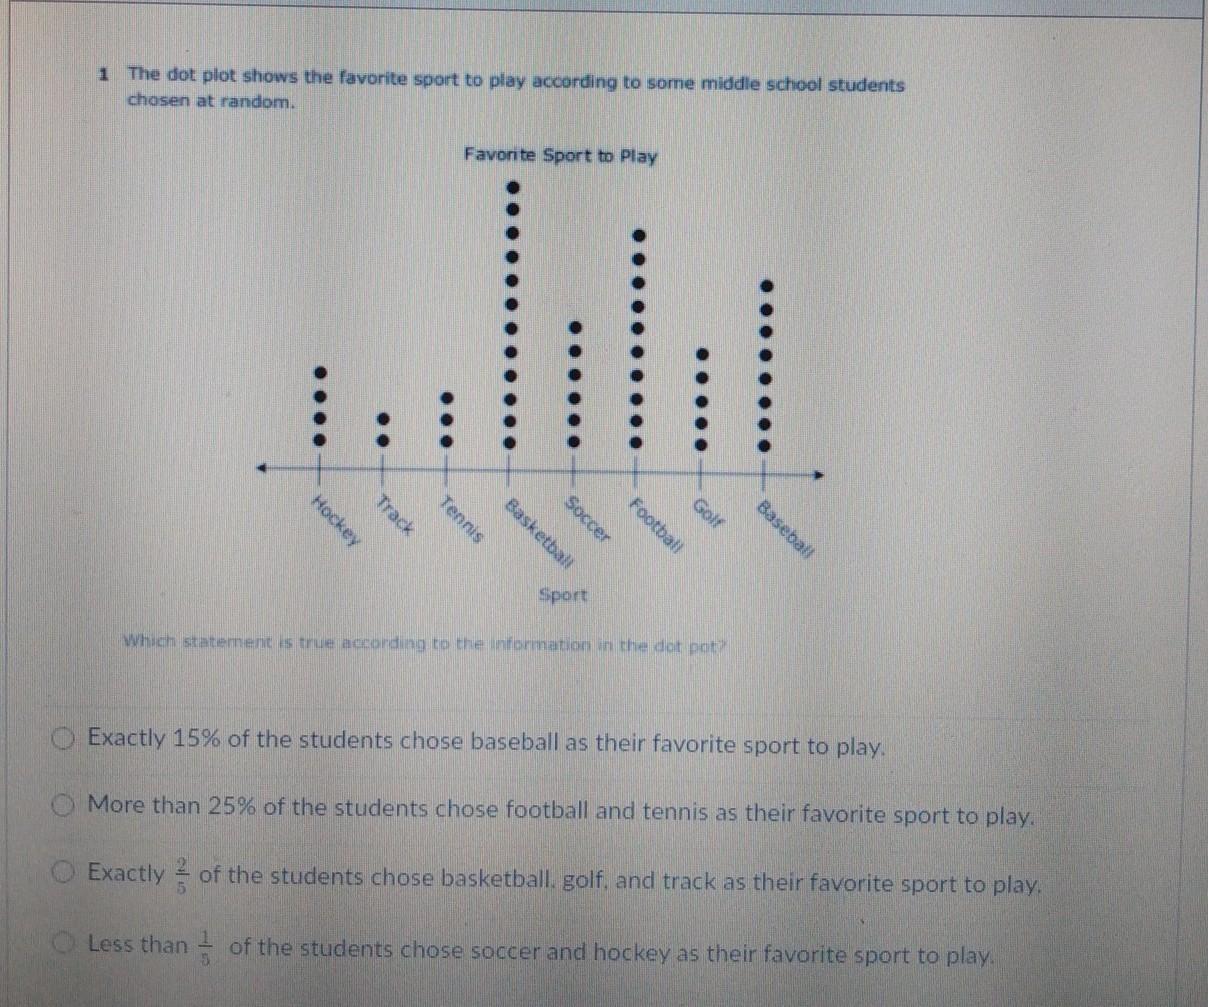 ILL GIVE BRAINLIEST PLSSSS HELP BASICALLY EVERYTHING IS IN THE PICTURE IF YOU ANSWER THIS WRONG OR PUT